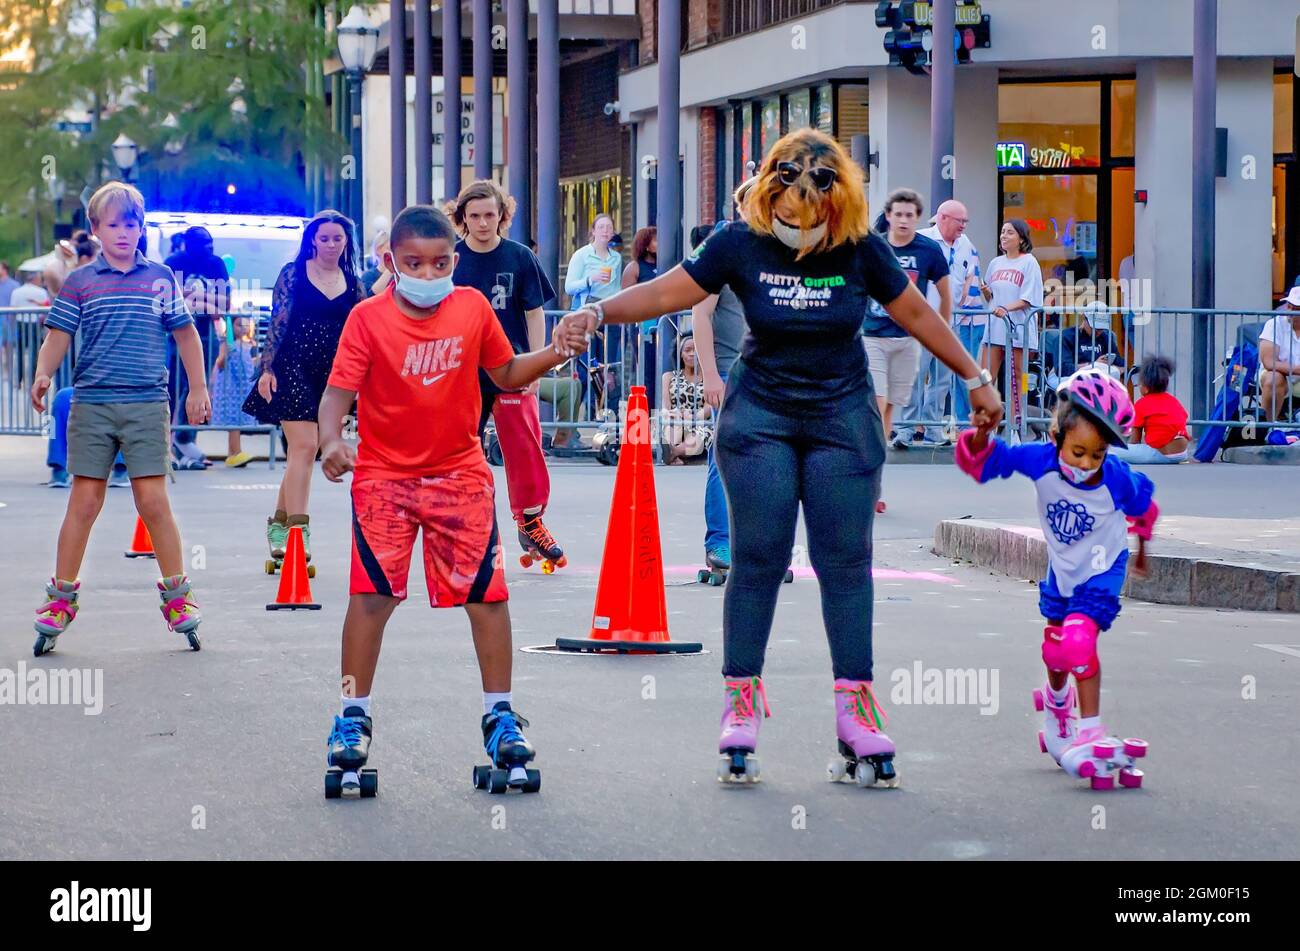 A woman helps two children learn to roller skate during Roll Mobile, Sept. 10, 2021, in Mobile, Alabama. The skate night is held monthly. Stock Photo